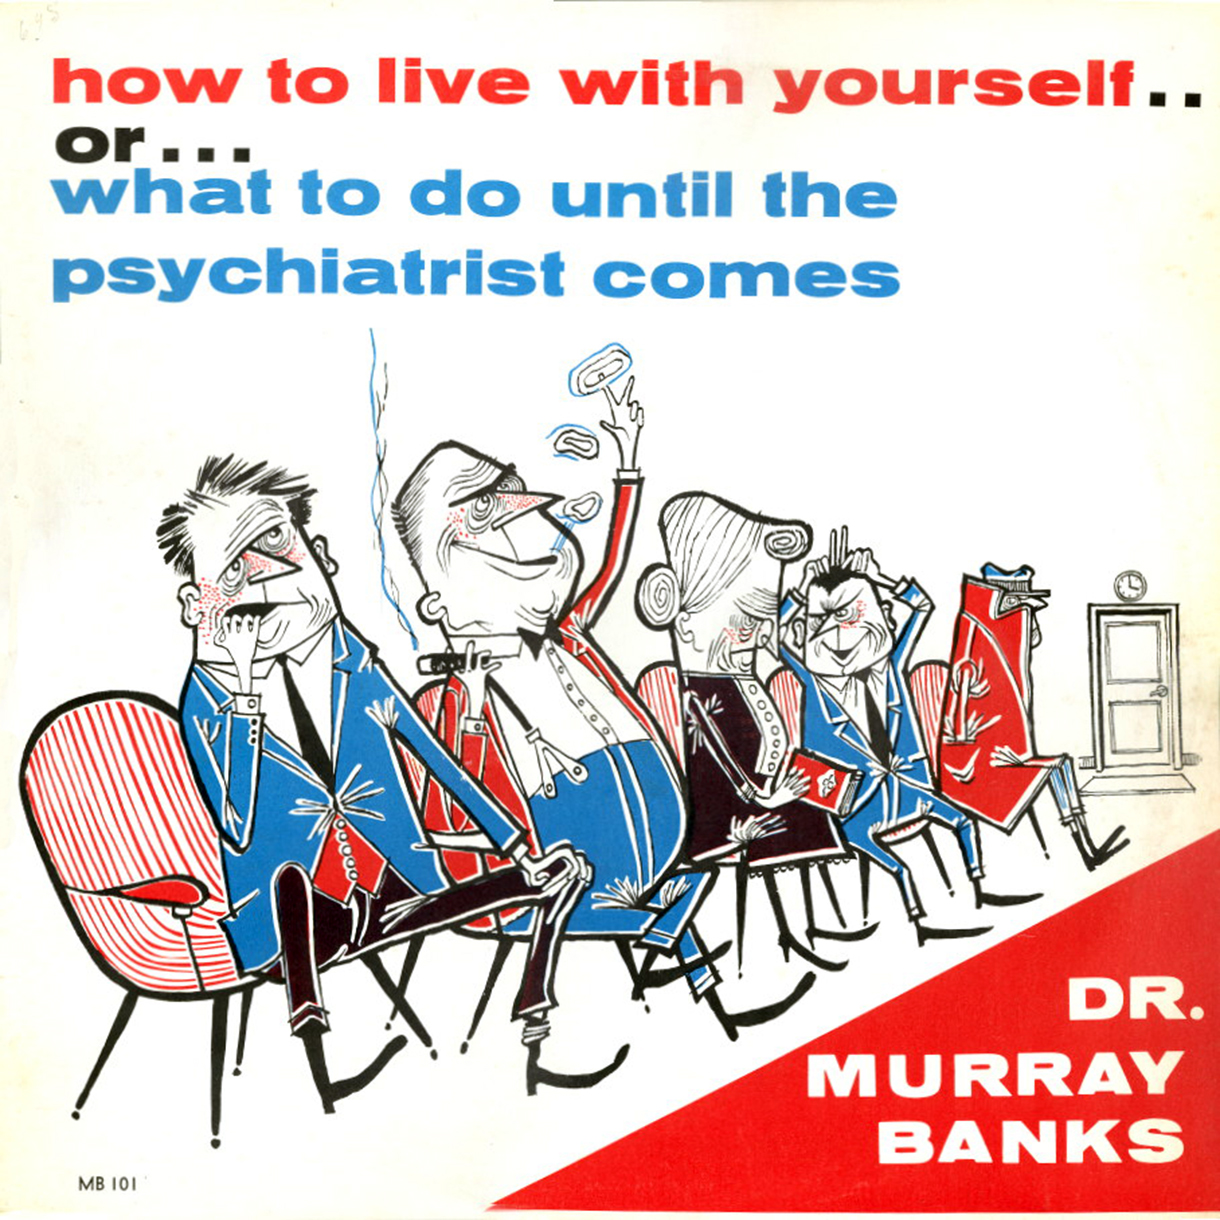 How to Live with Yourself Dr. Murray Banks